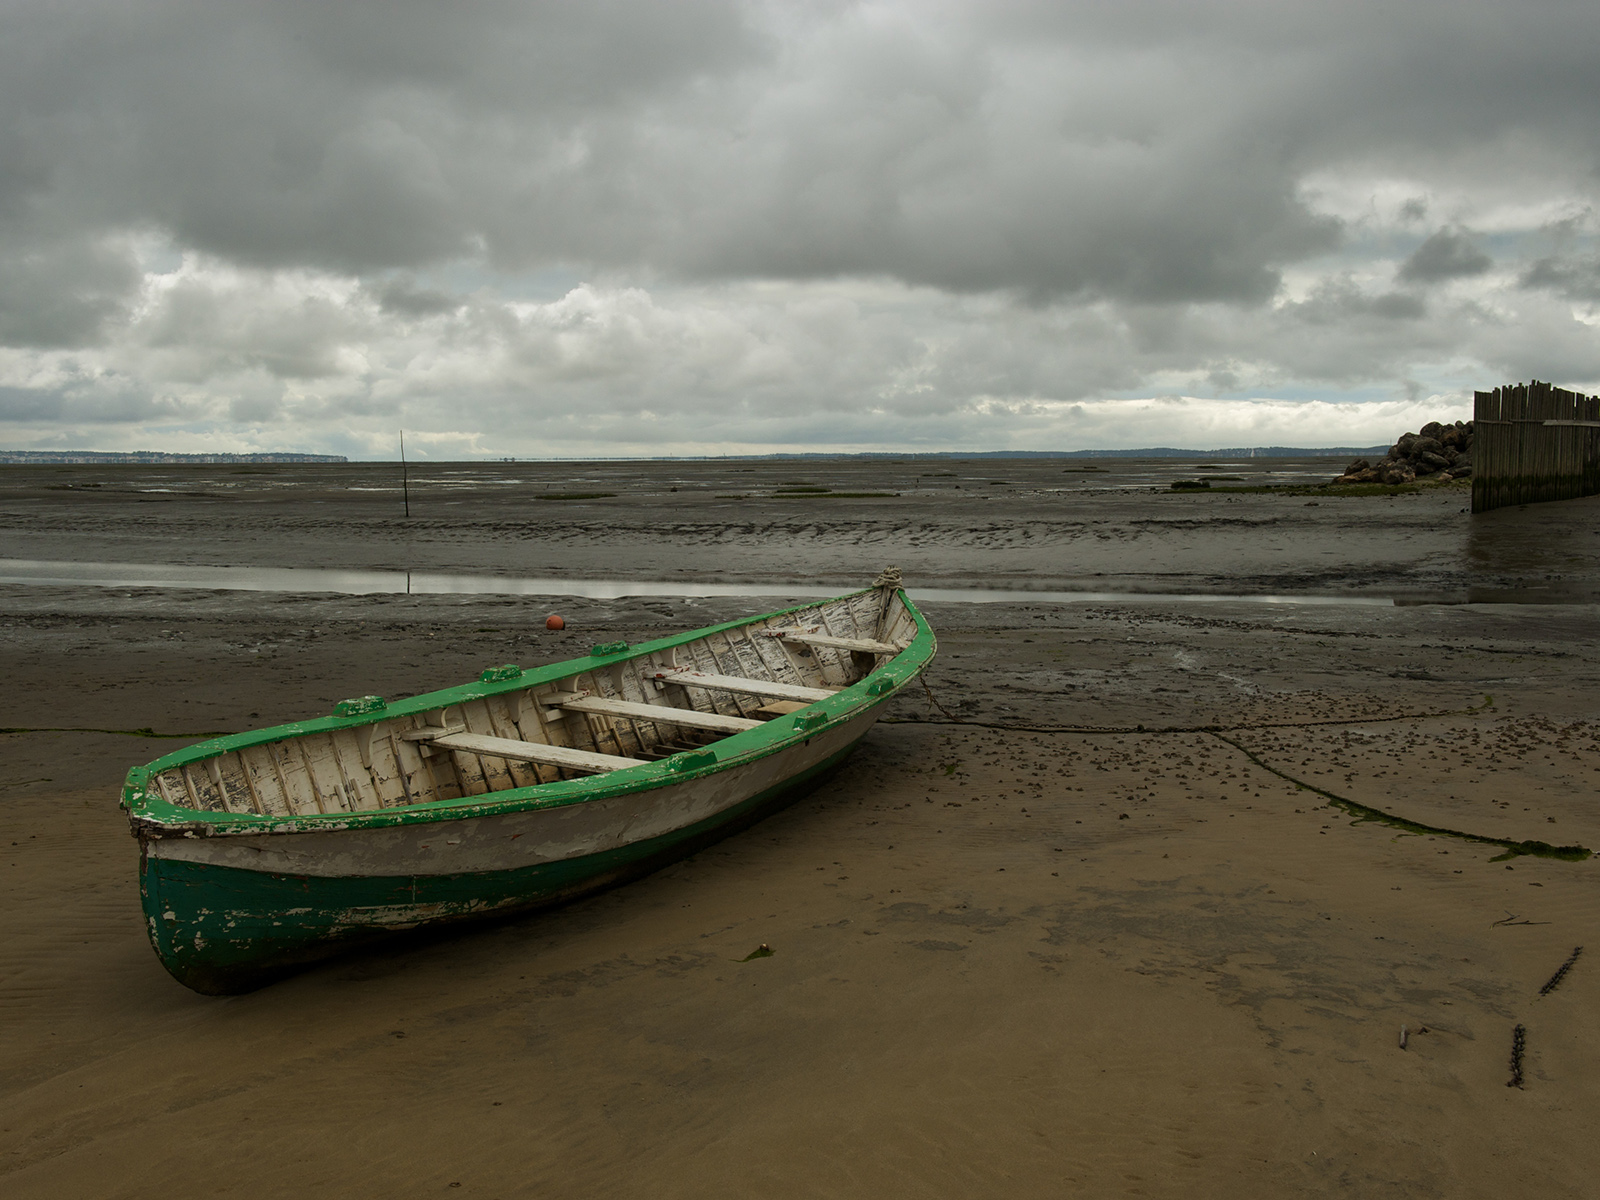 a wooden fishing boat stranded at low tide in the Arcachon Bassin, near Bordeaux, France